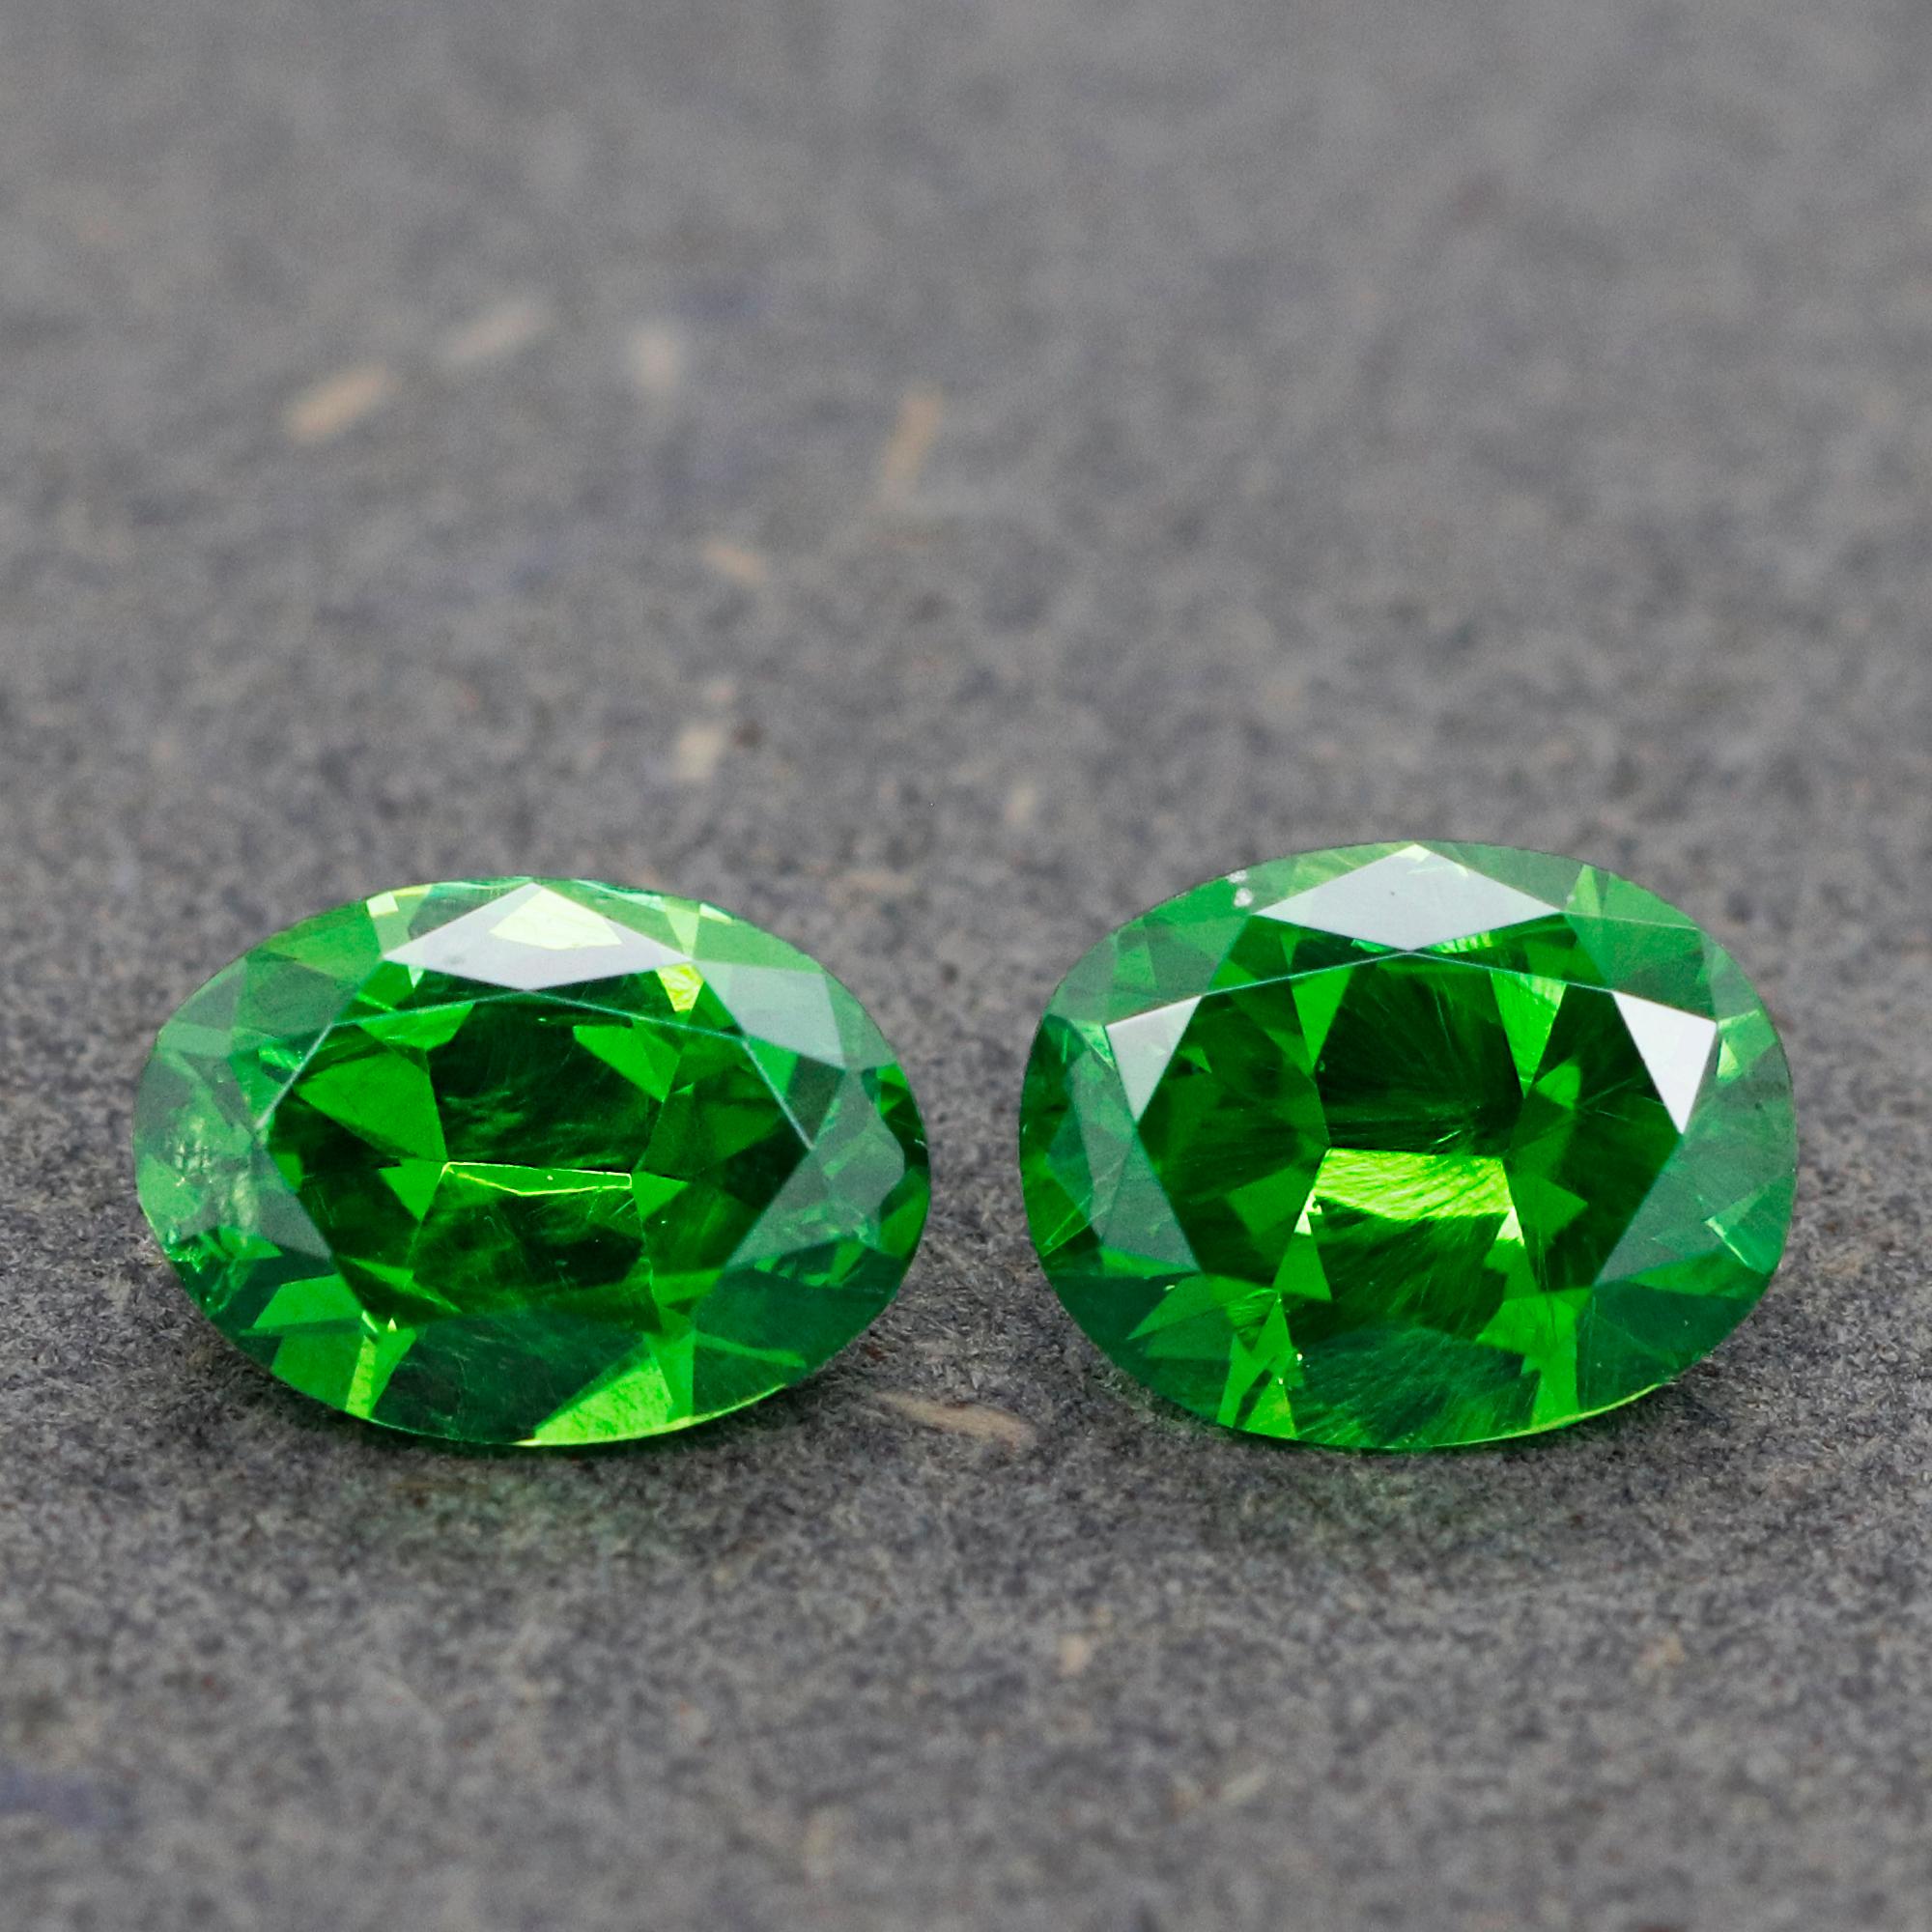 The Ural Mountains of Russia have long been recognized as the most important and consistent source of the rarest variety of Garnets, known as Demantoid. These unique gemstones are highly valued for their exceptional quality and brilliance, making